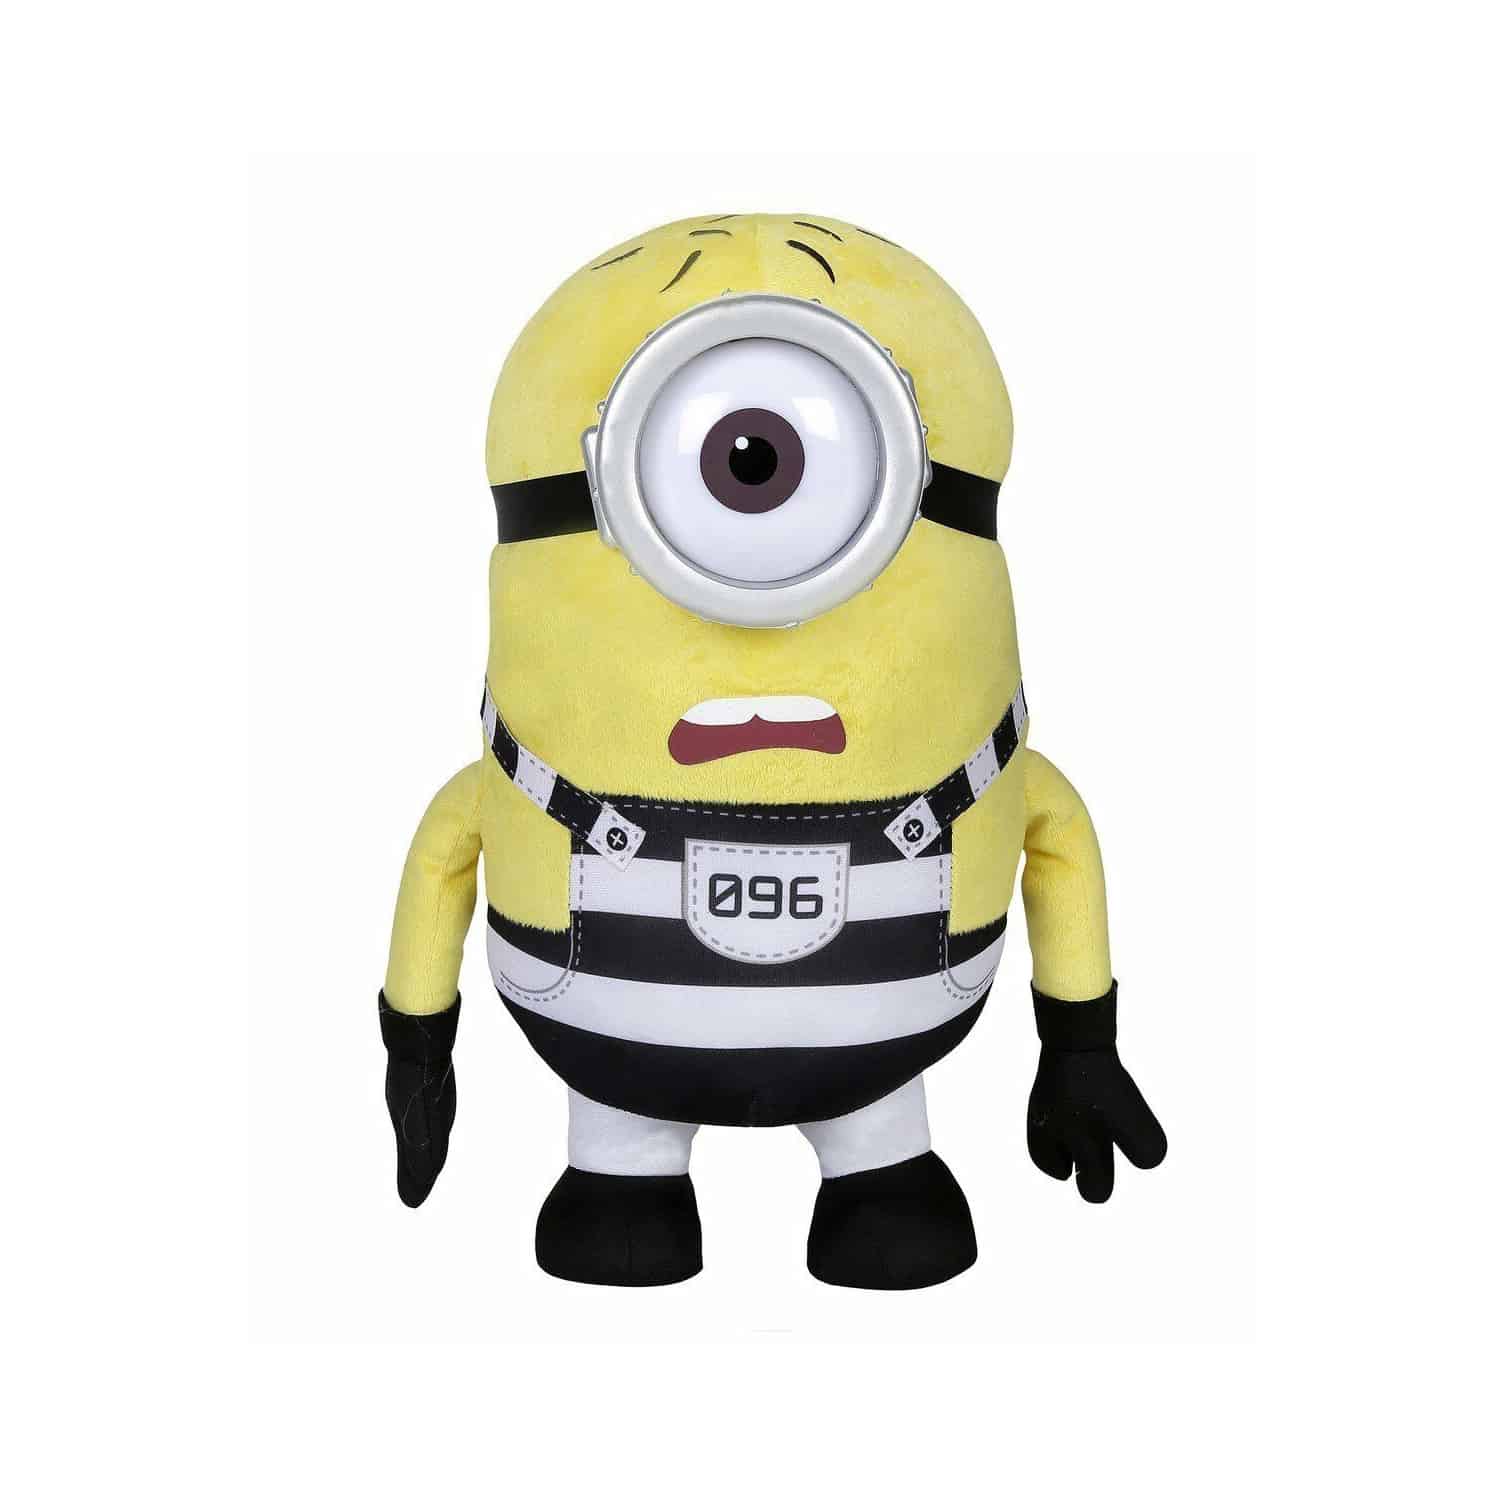 OFFICIAL DESPICABLE ME 3 JAIL MINIONS DAVE LARGE 12" SOFT PLUSH TOY TEDDY 